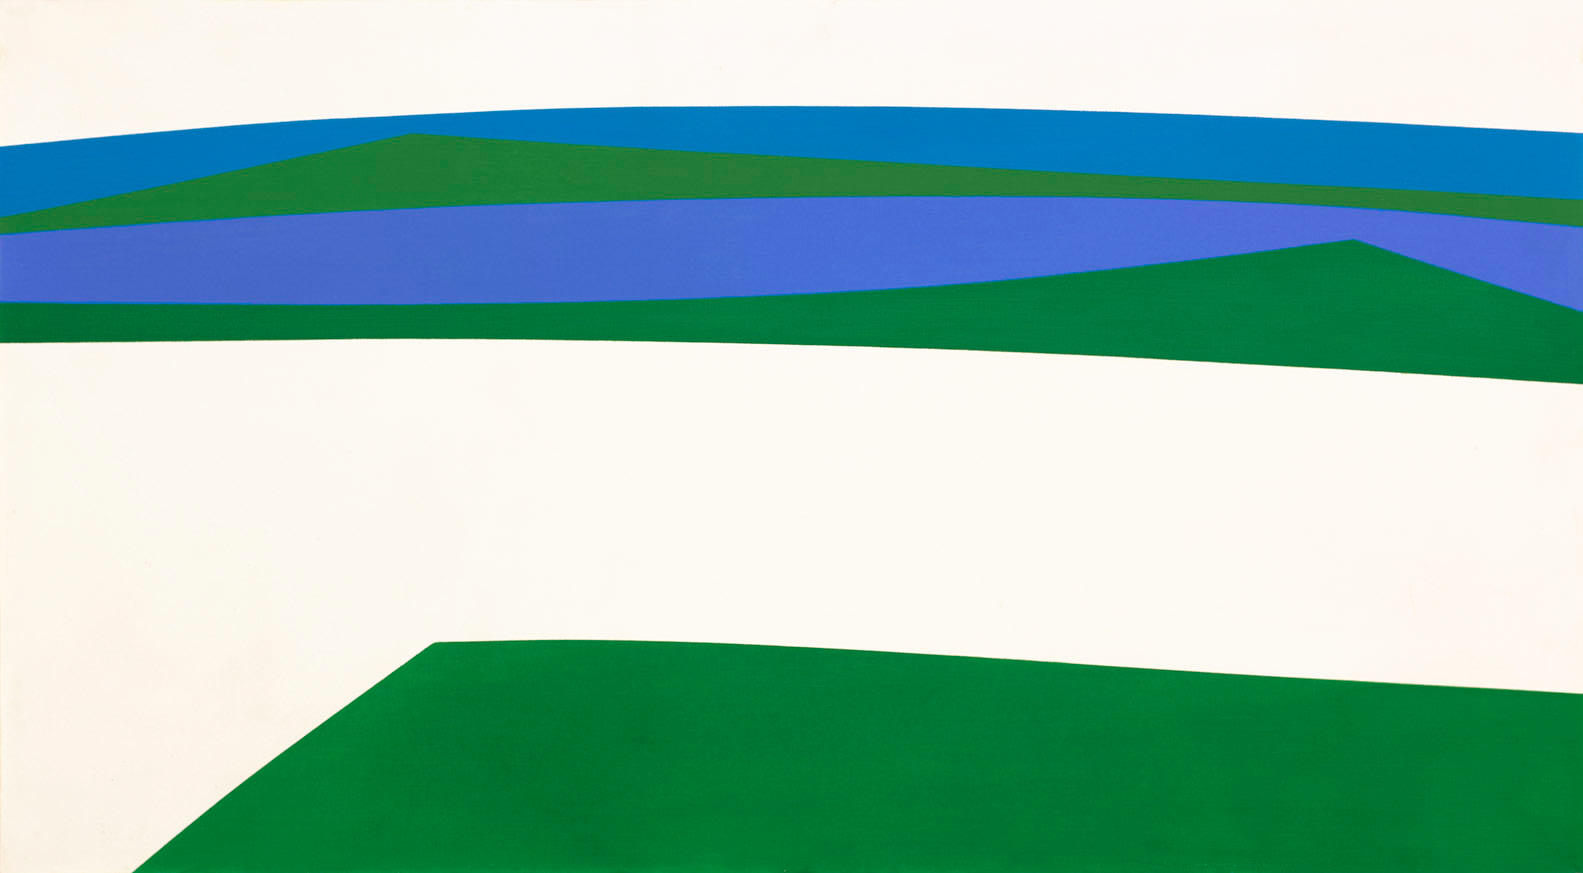 Helen Lundeberg

Untitled Breakwater, 1963

acrylic on canvas

36 x 20 inches; 91.4 x 50.8 centimeters